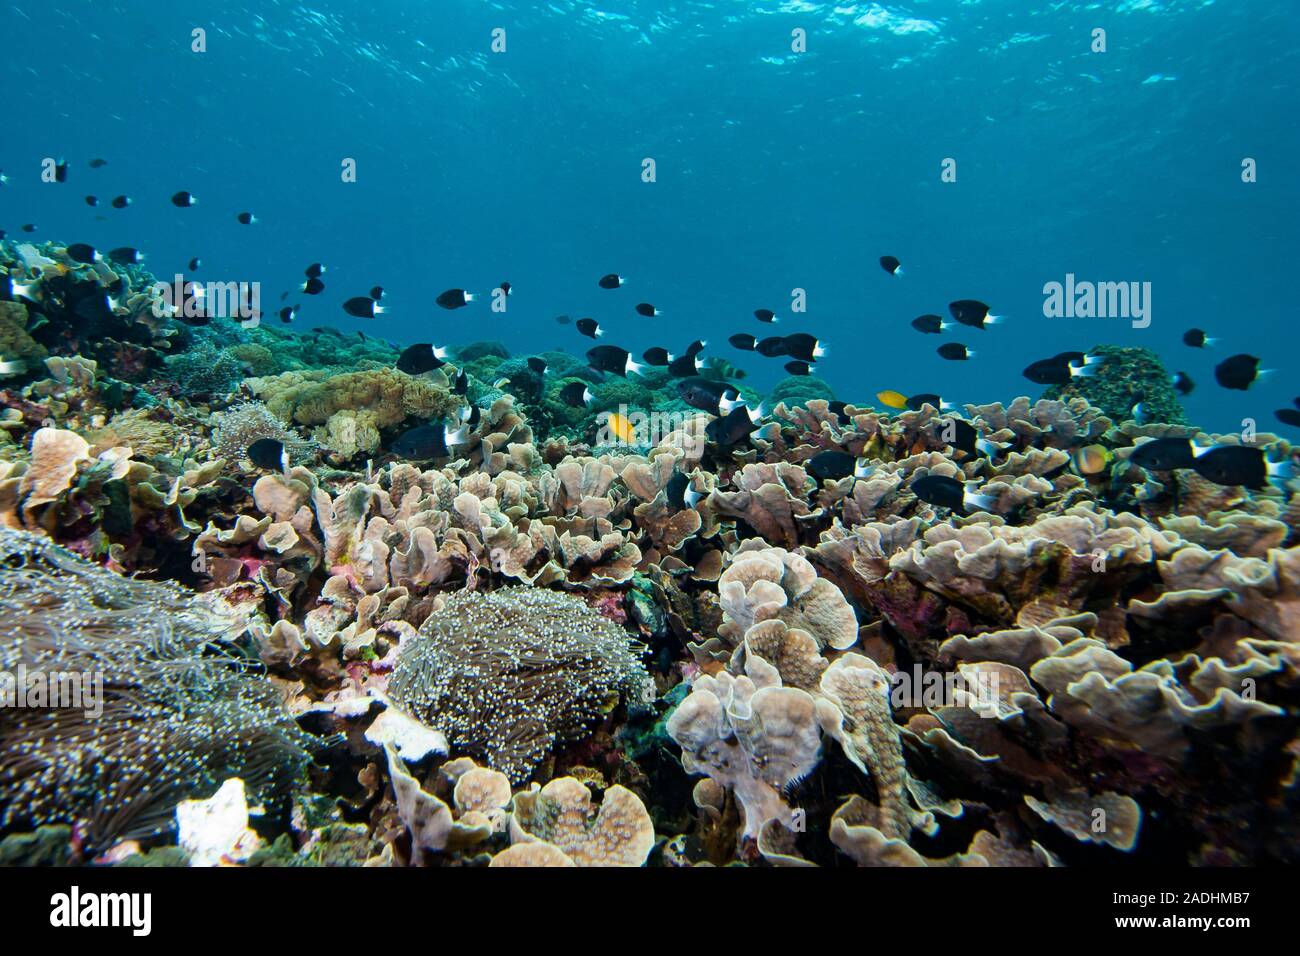 Underwater Tropical Coral Reefs Stock Photo